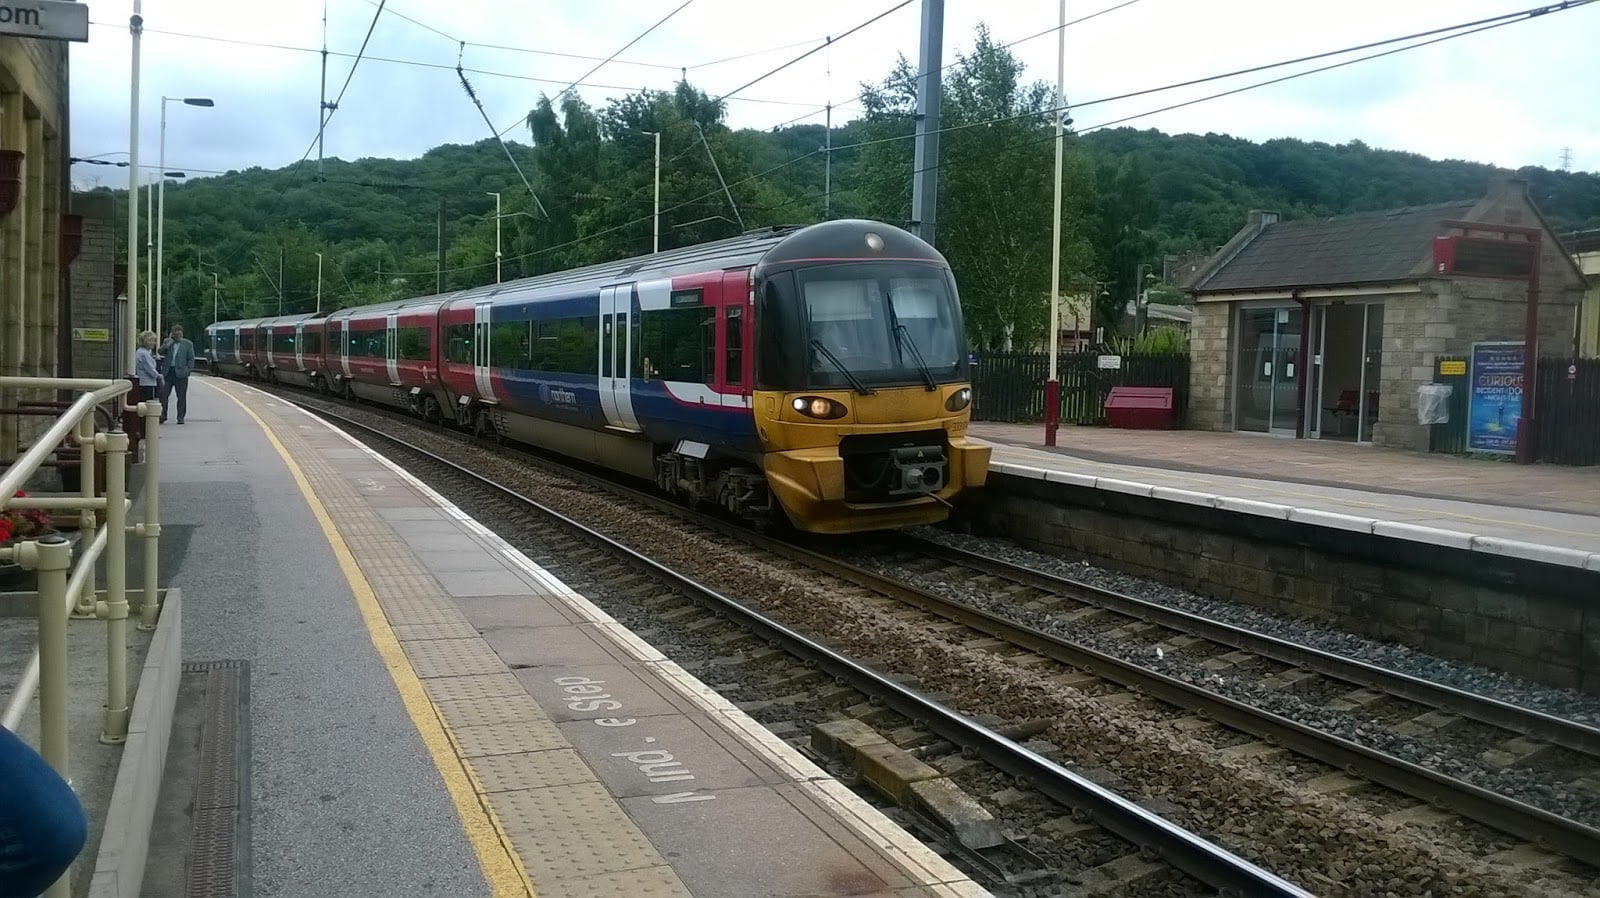 Class 333 at Keighley heading for Skipton